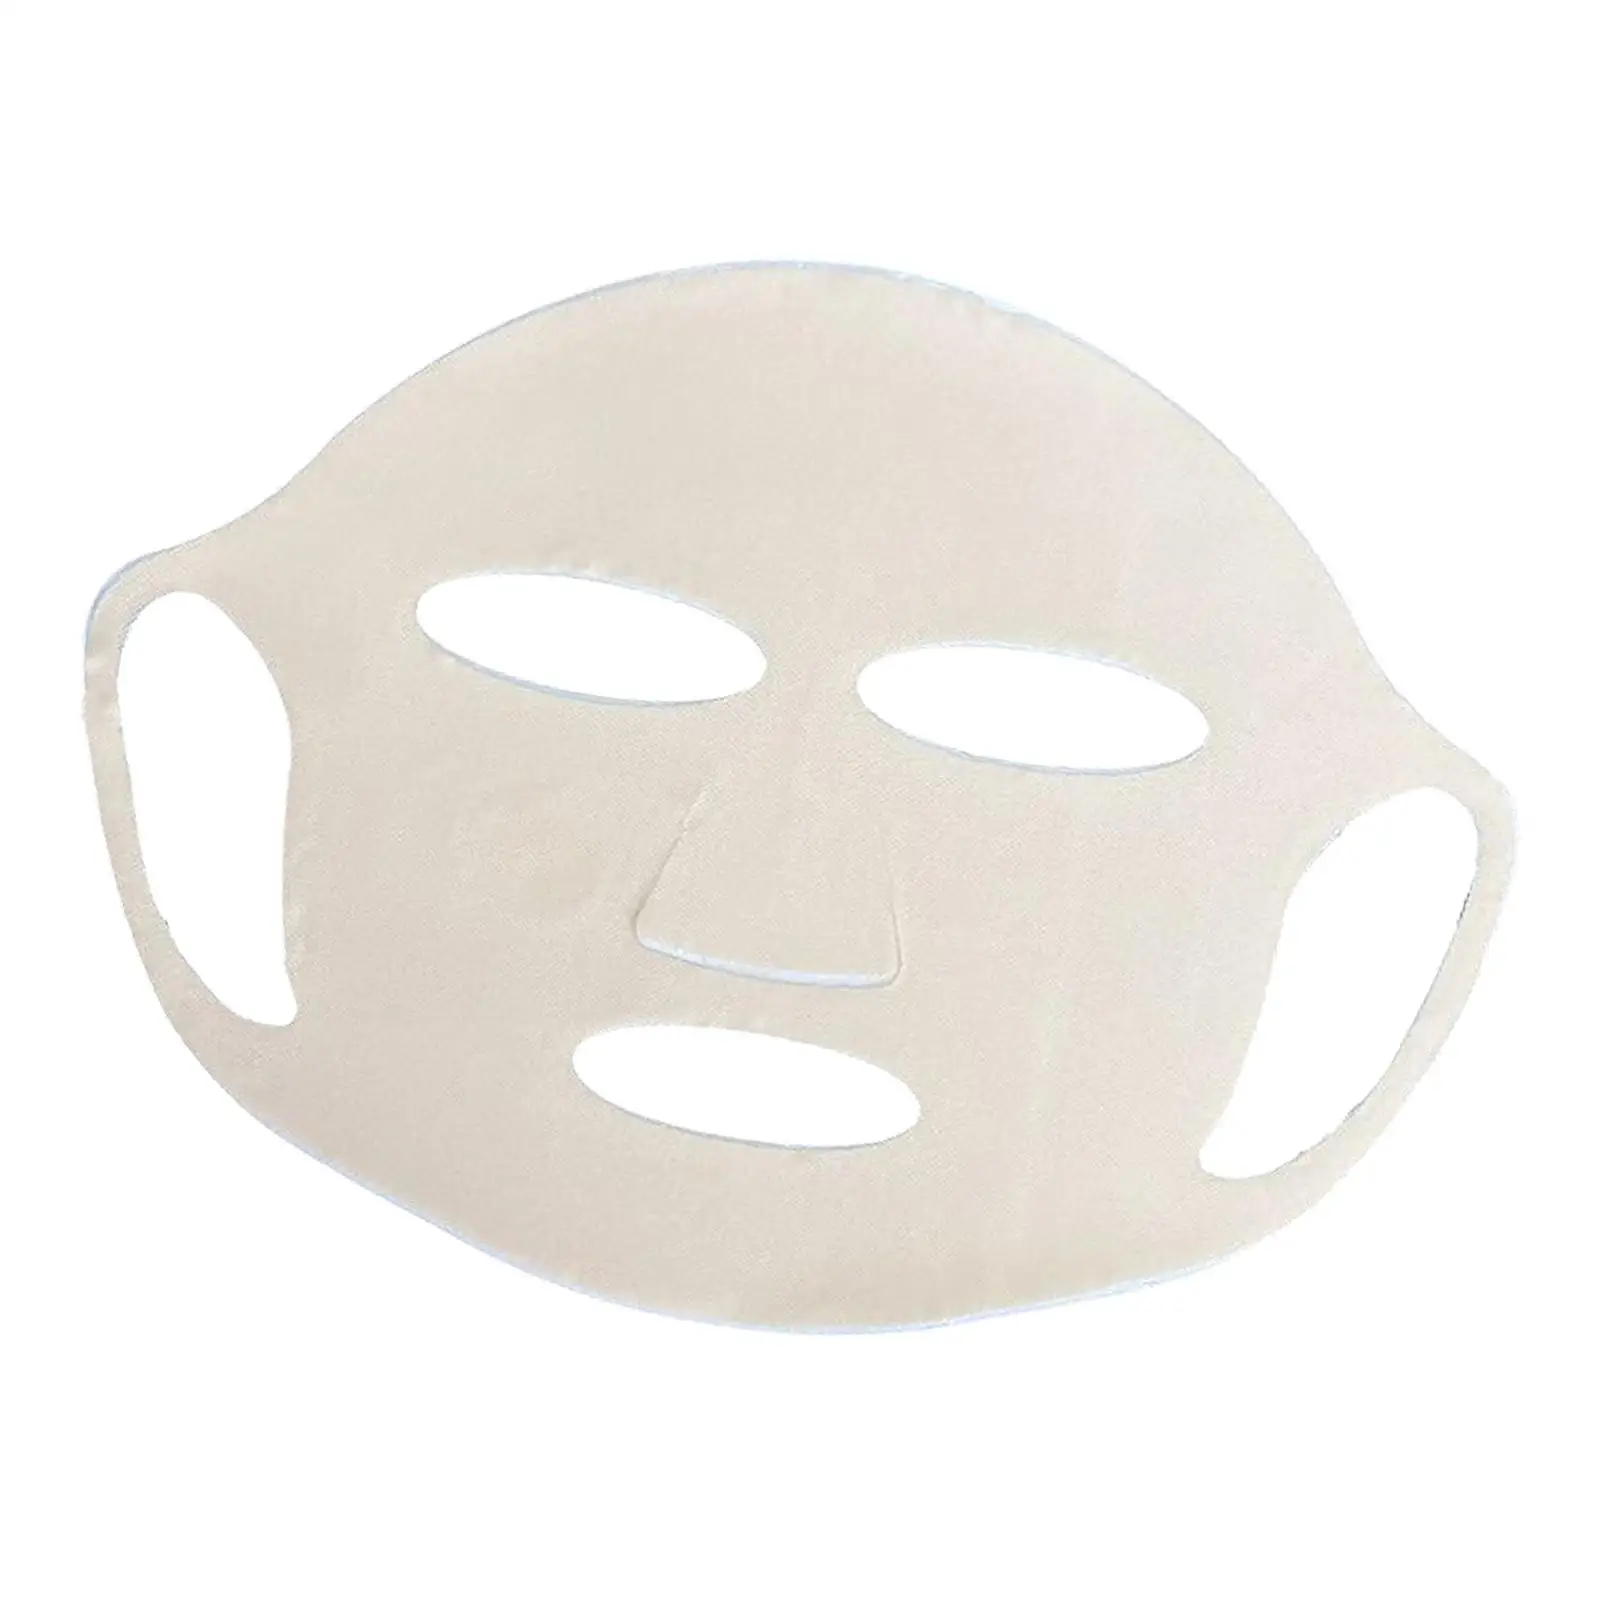 Outdoor Gel Mask Skincare Gel Mask for Golf Outdoor Sports Mountain